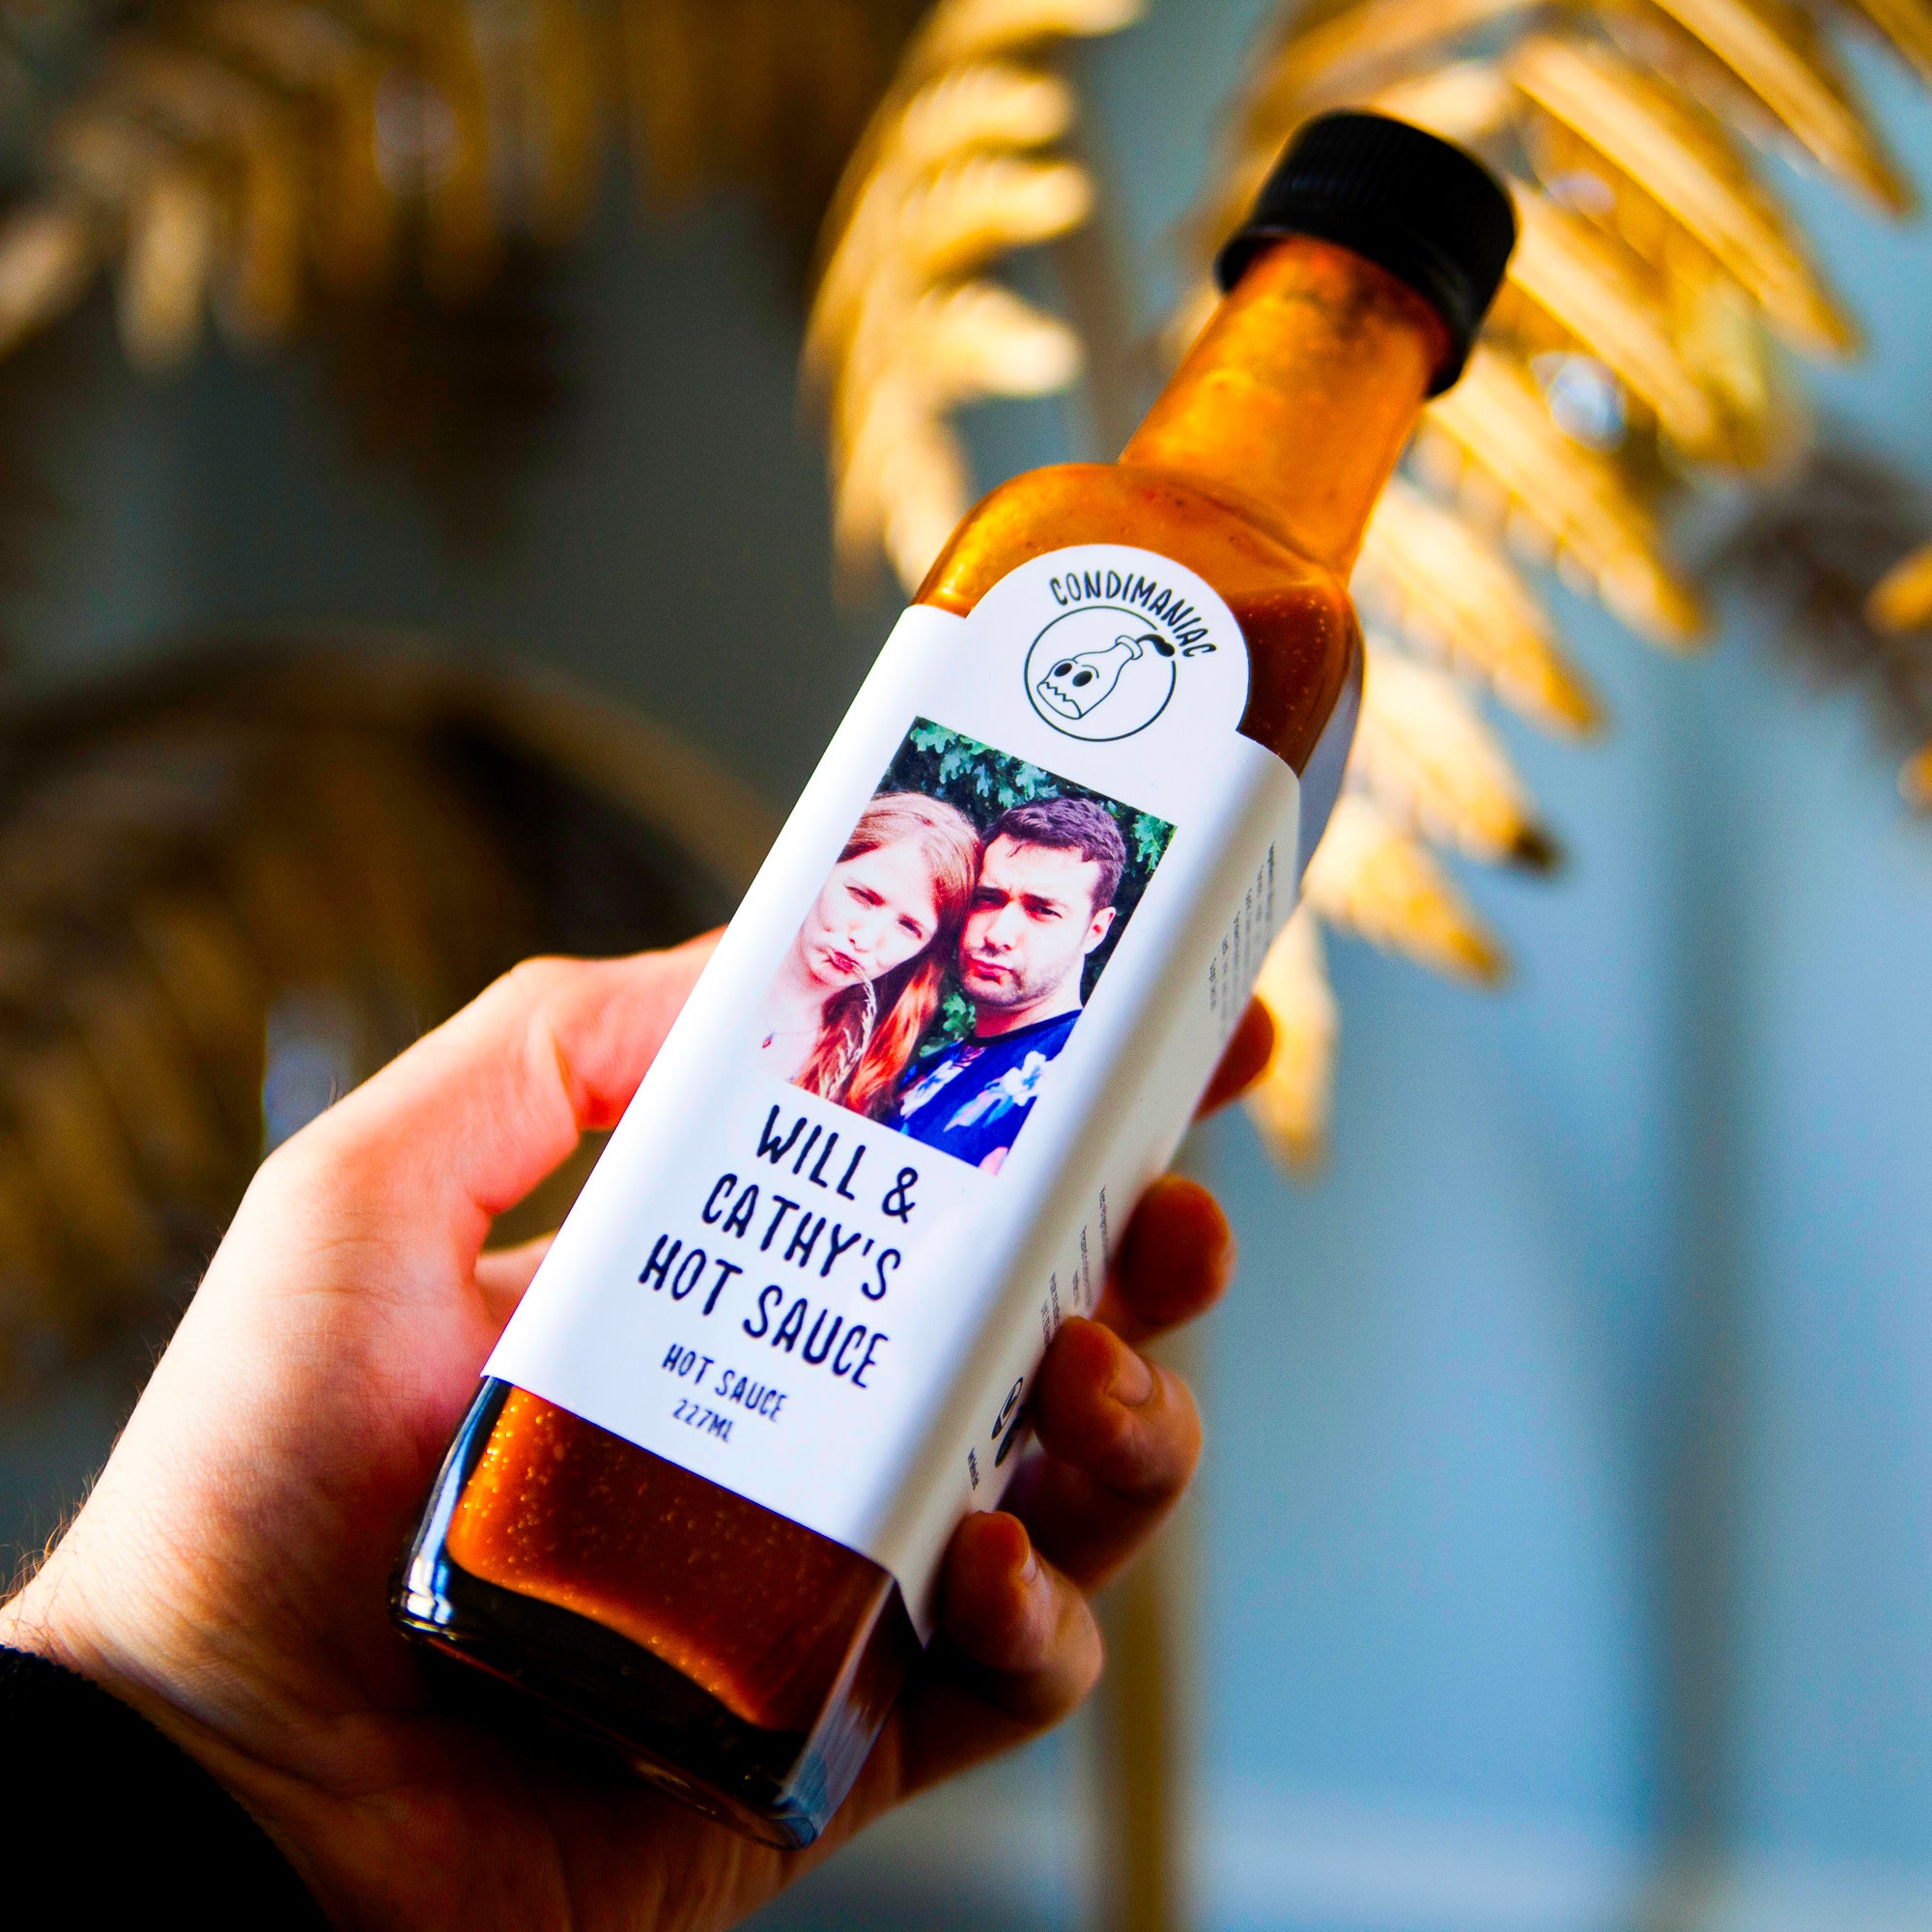 UK Custom Hot Sauce - The Perfect Gift For Father's Day?